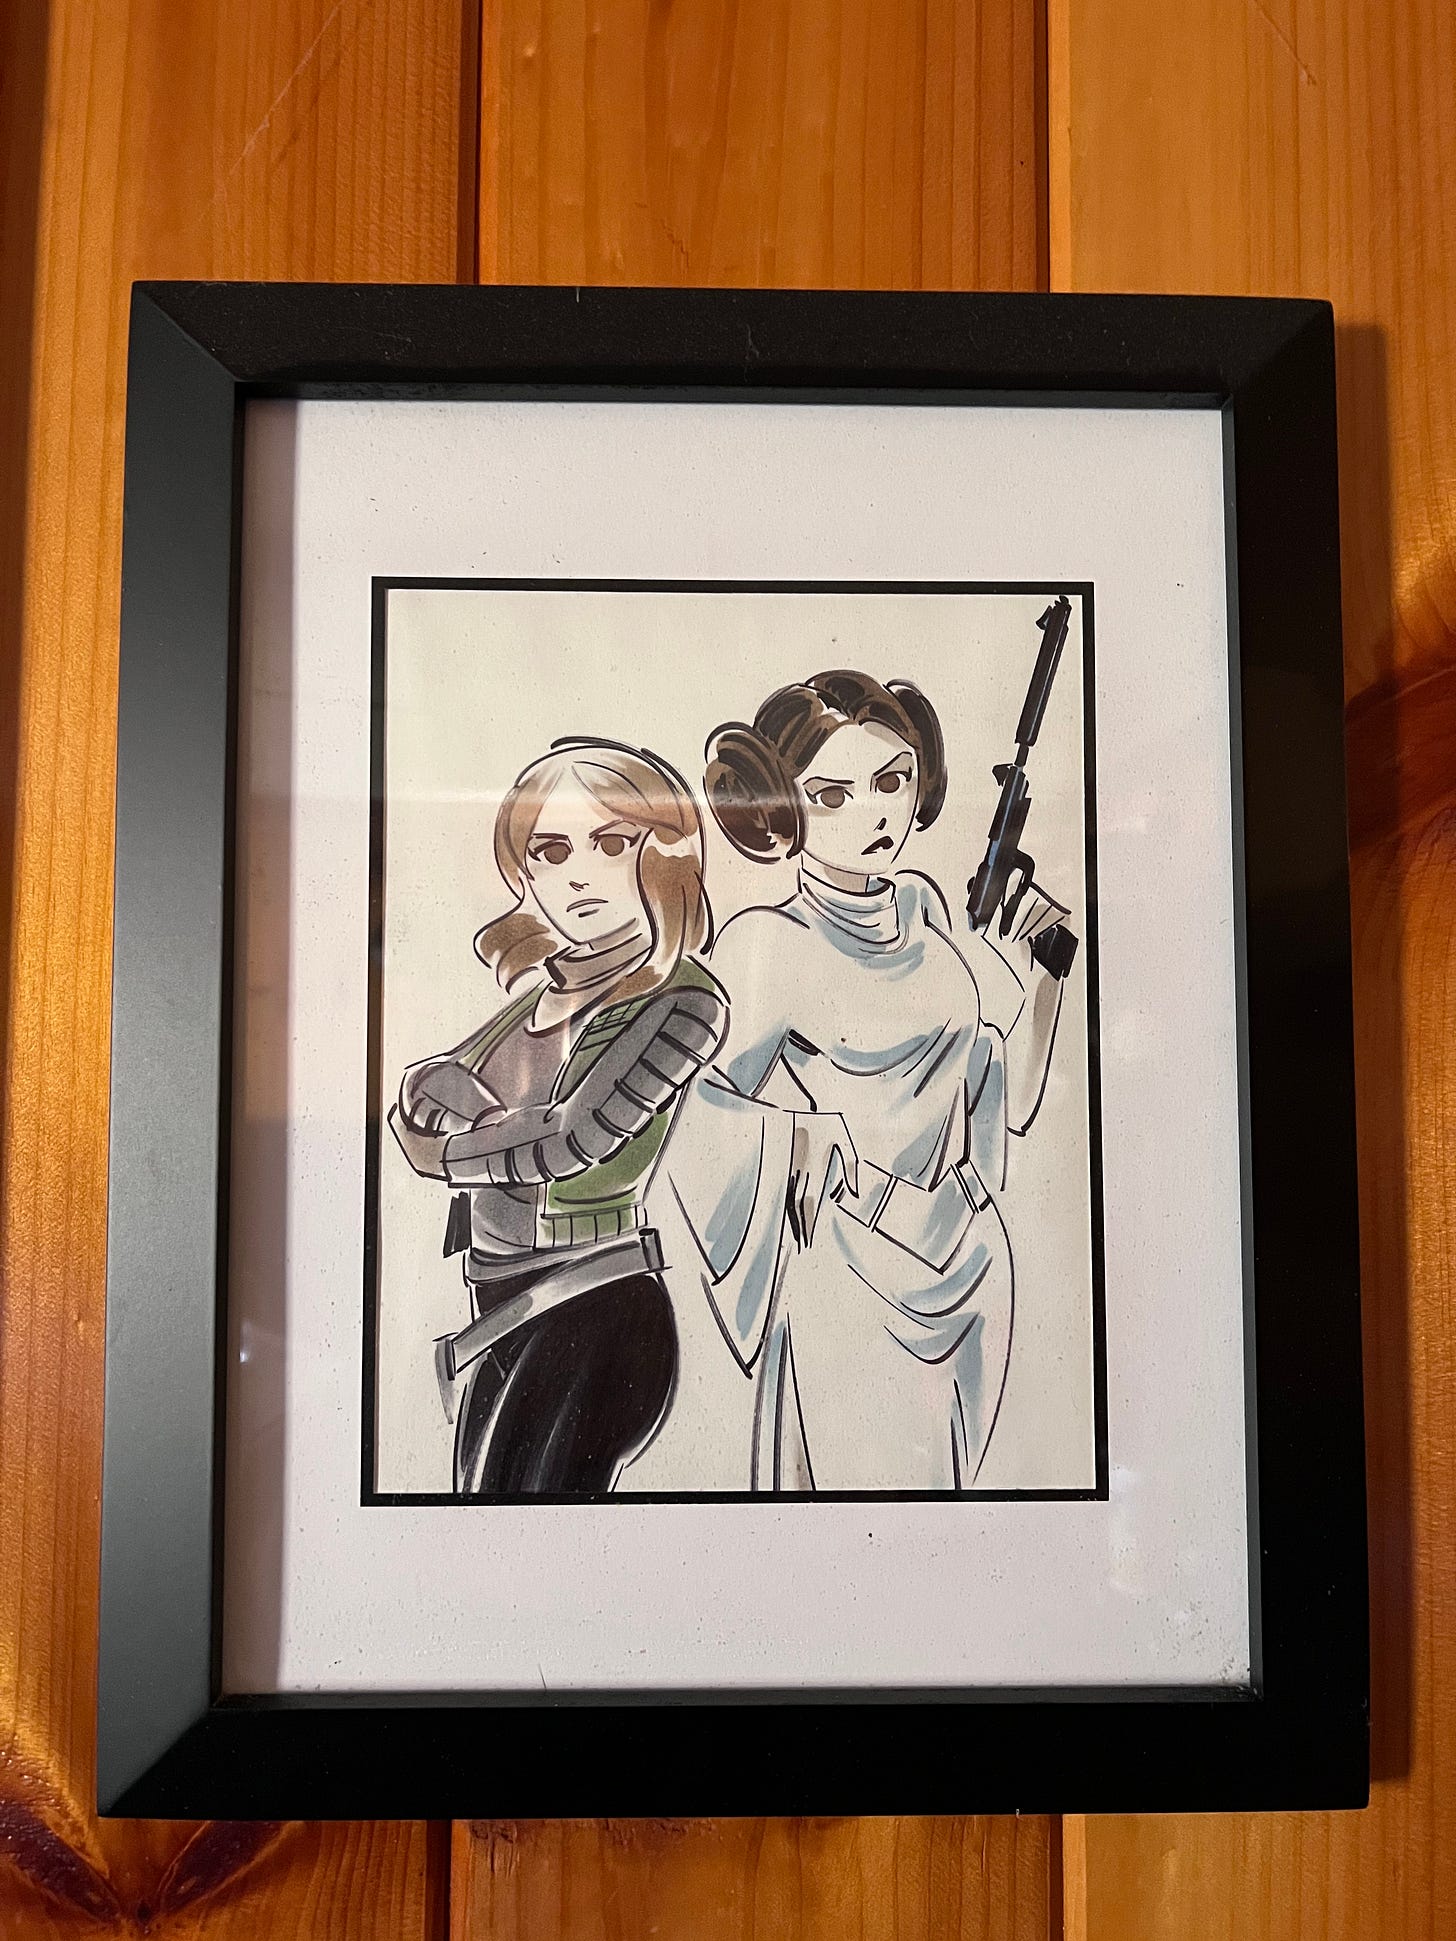 Photo of an illustration of Jyn Erso standing back-to-back with Leia